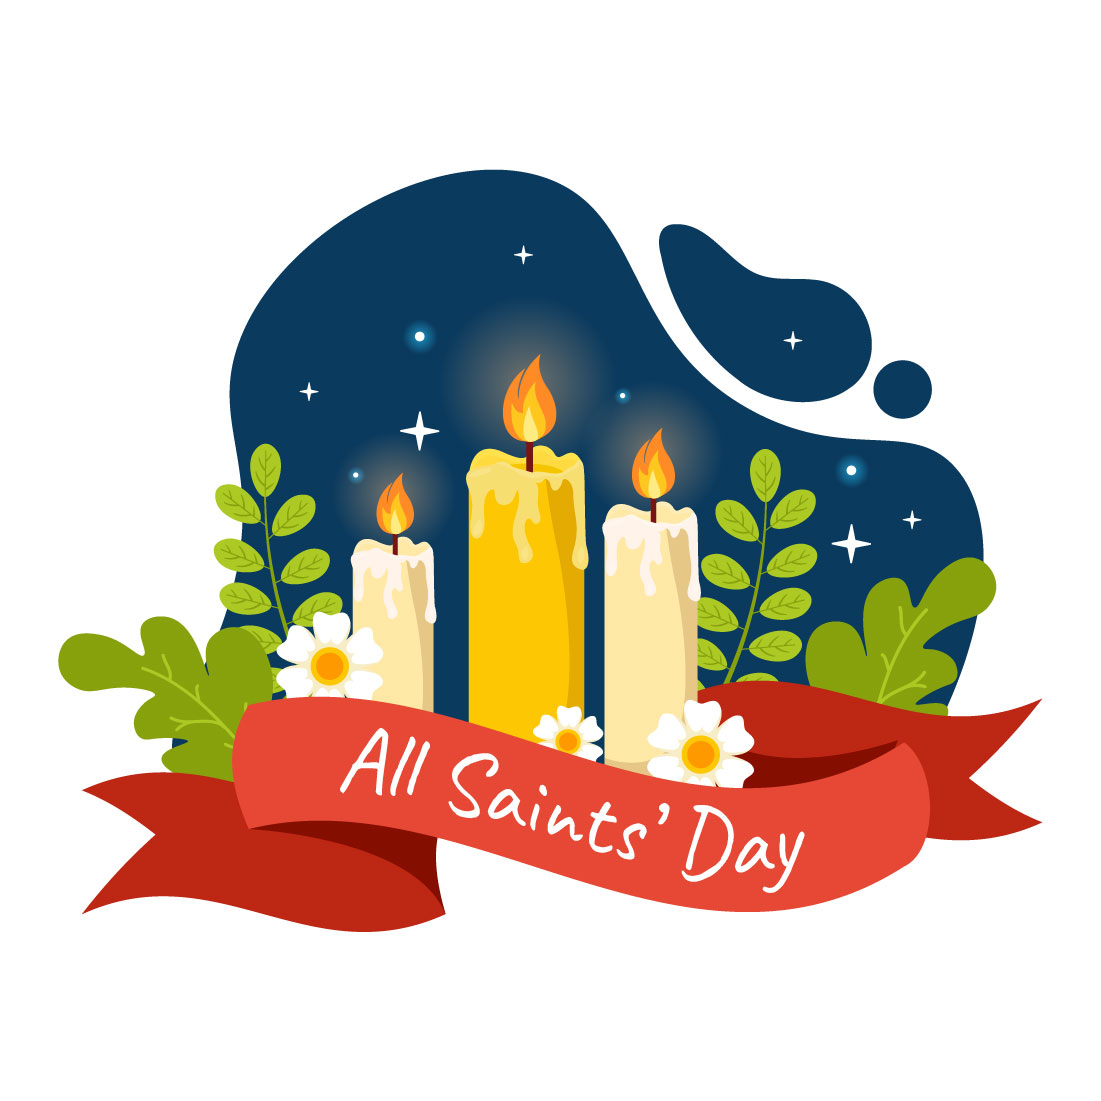 12 All Saints Day Vector Illustration preview image.